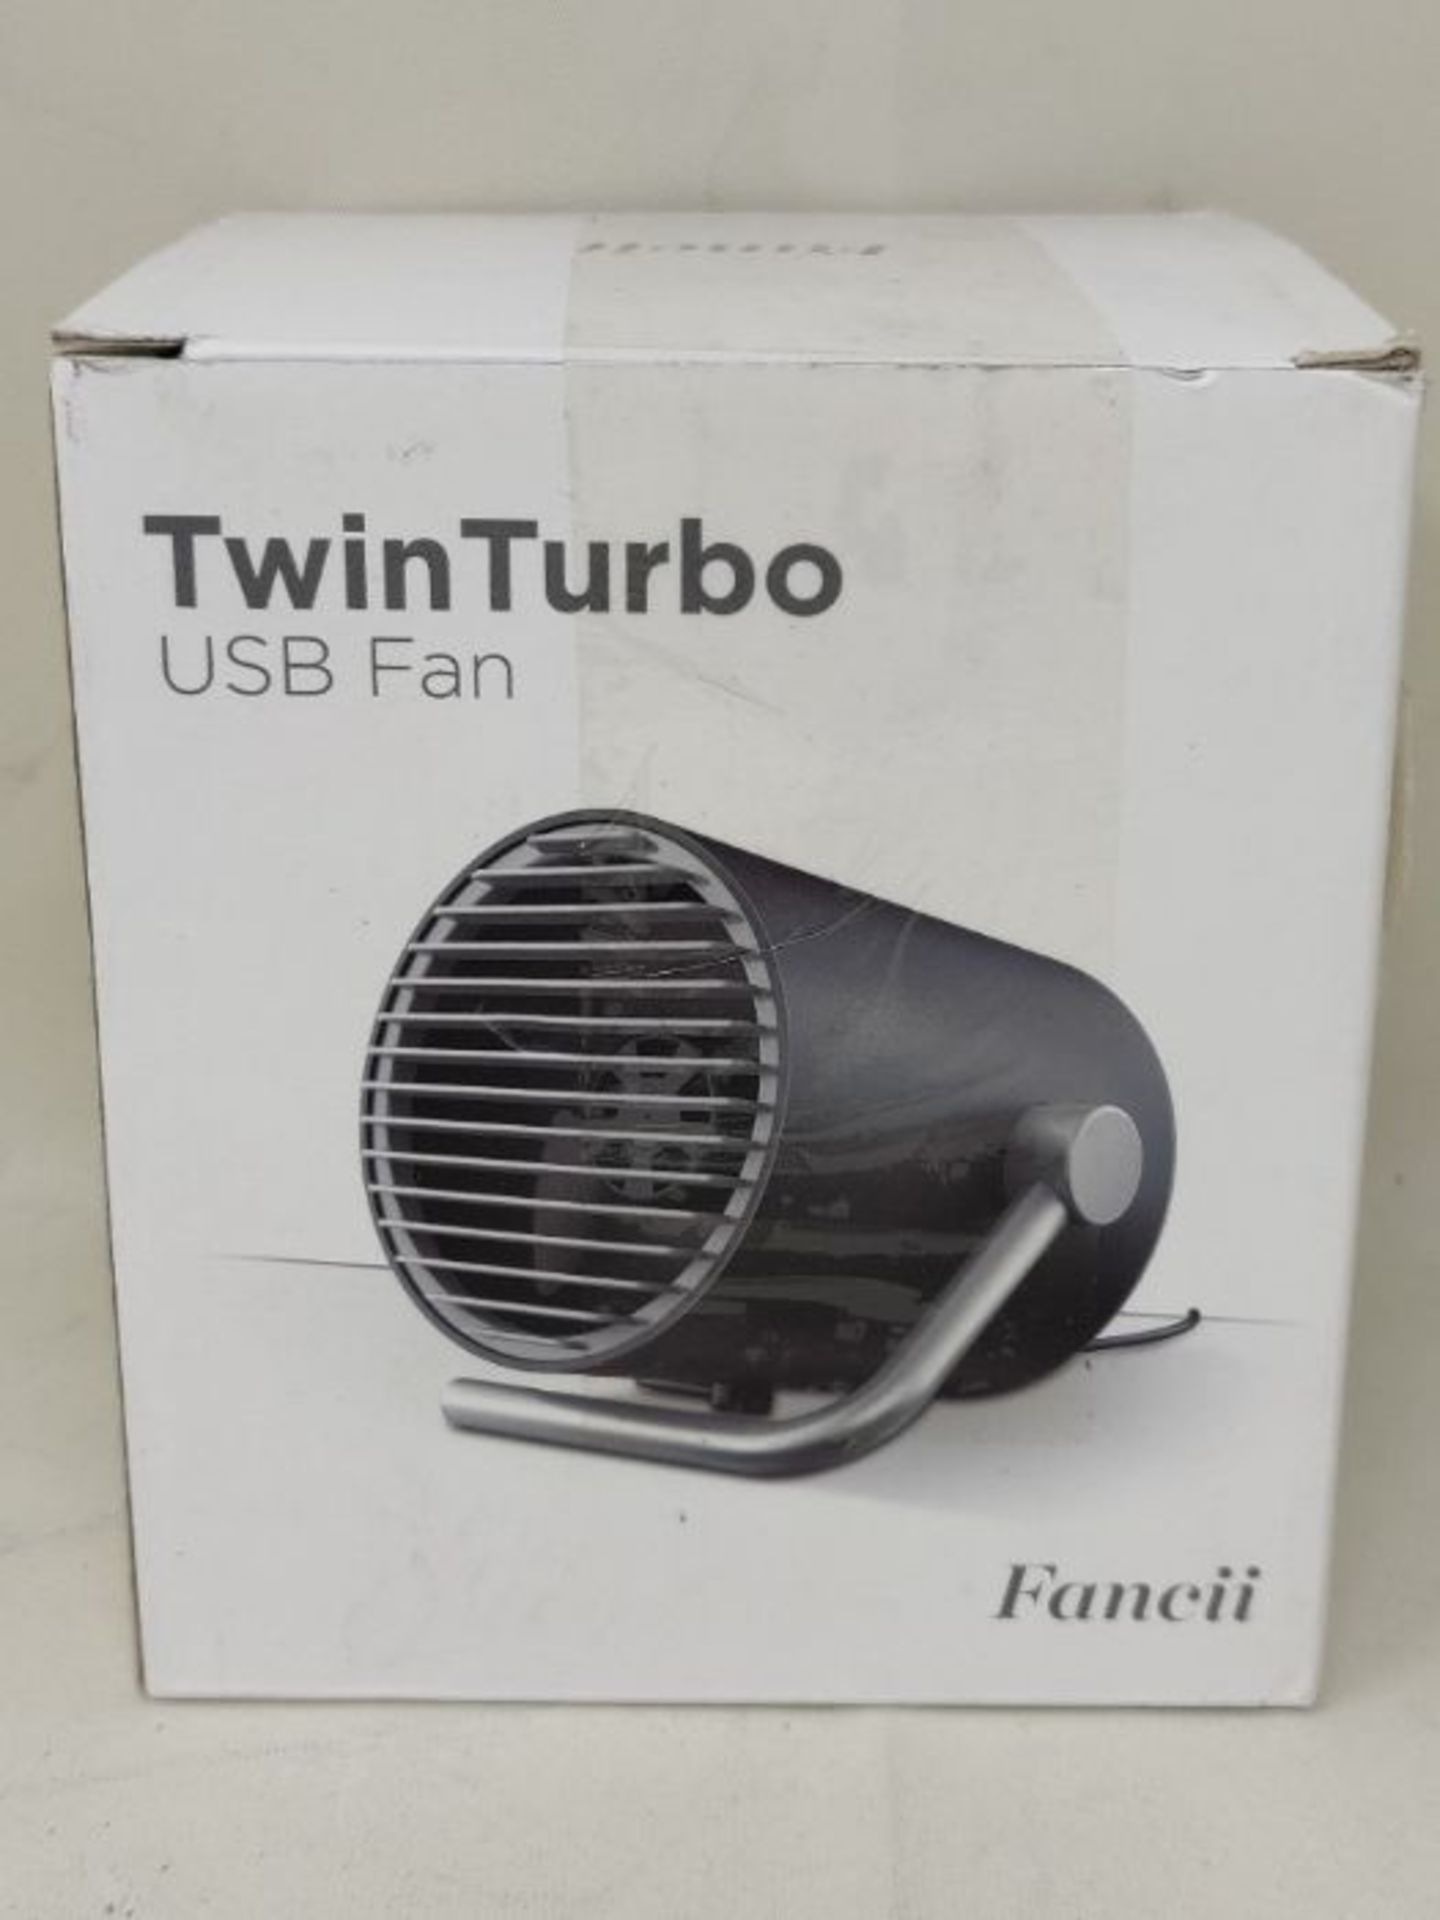 [CRACKED] Fancii Small Personal USB Fan - Portable Mini Table Desk Fan with Twin Turbo - Image 2 of 3